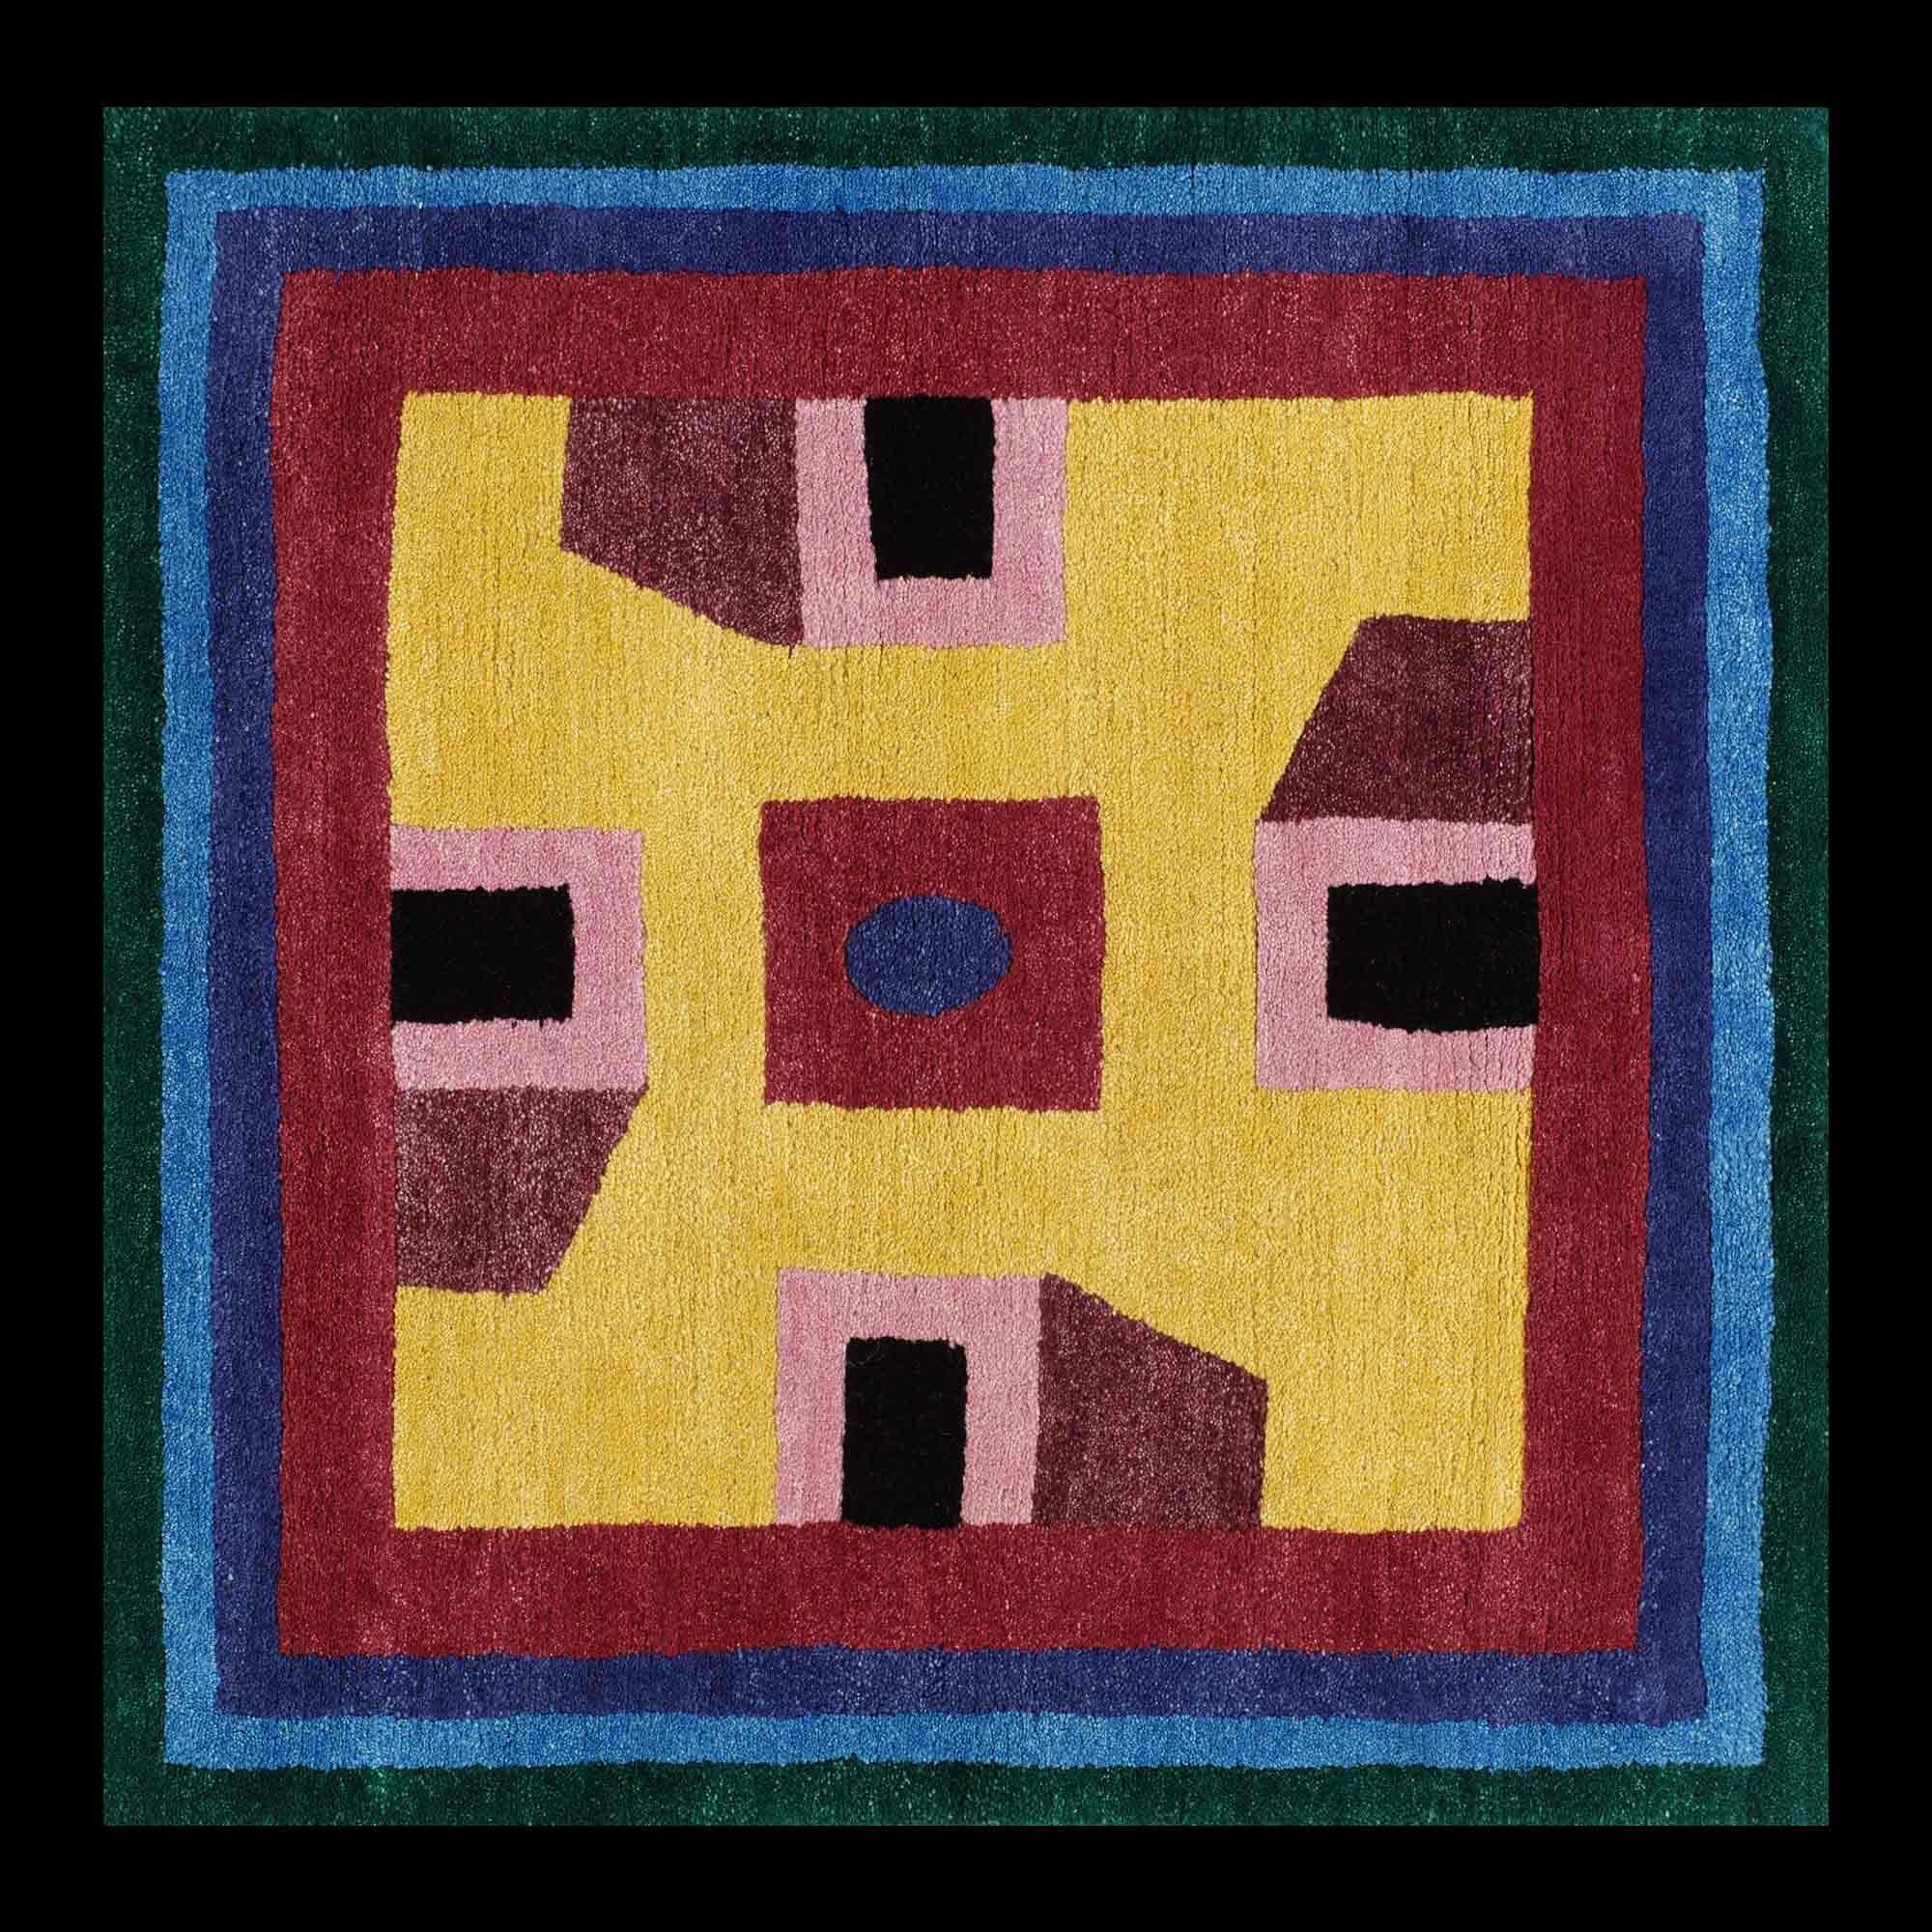 NDP21 woollen carpet by Nathalie du Pasquier for Post Design collection/Memphis

A woollen carpet handcrafted by different Nepalese artisans. Made in a limited edition of 36 signed, numbered examples.

As the carpet is made by hand, there are